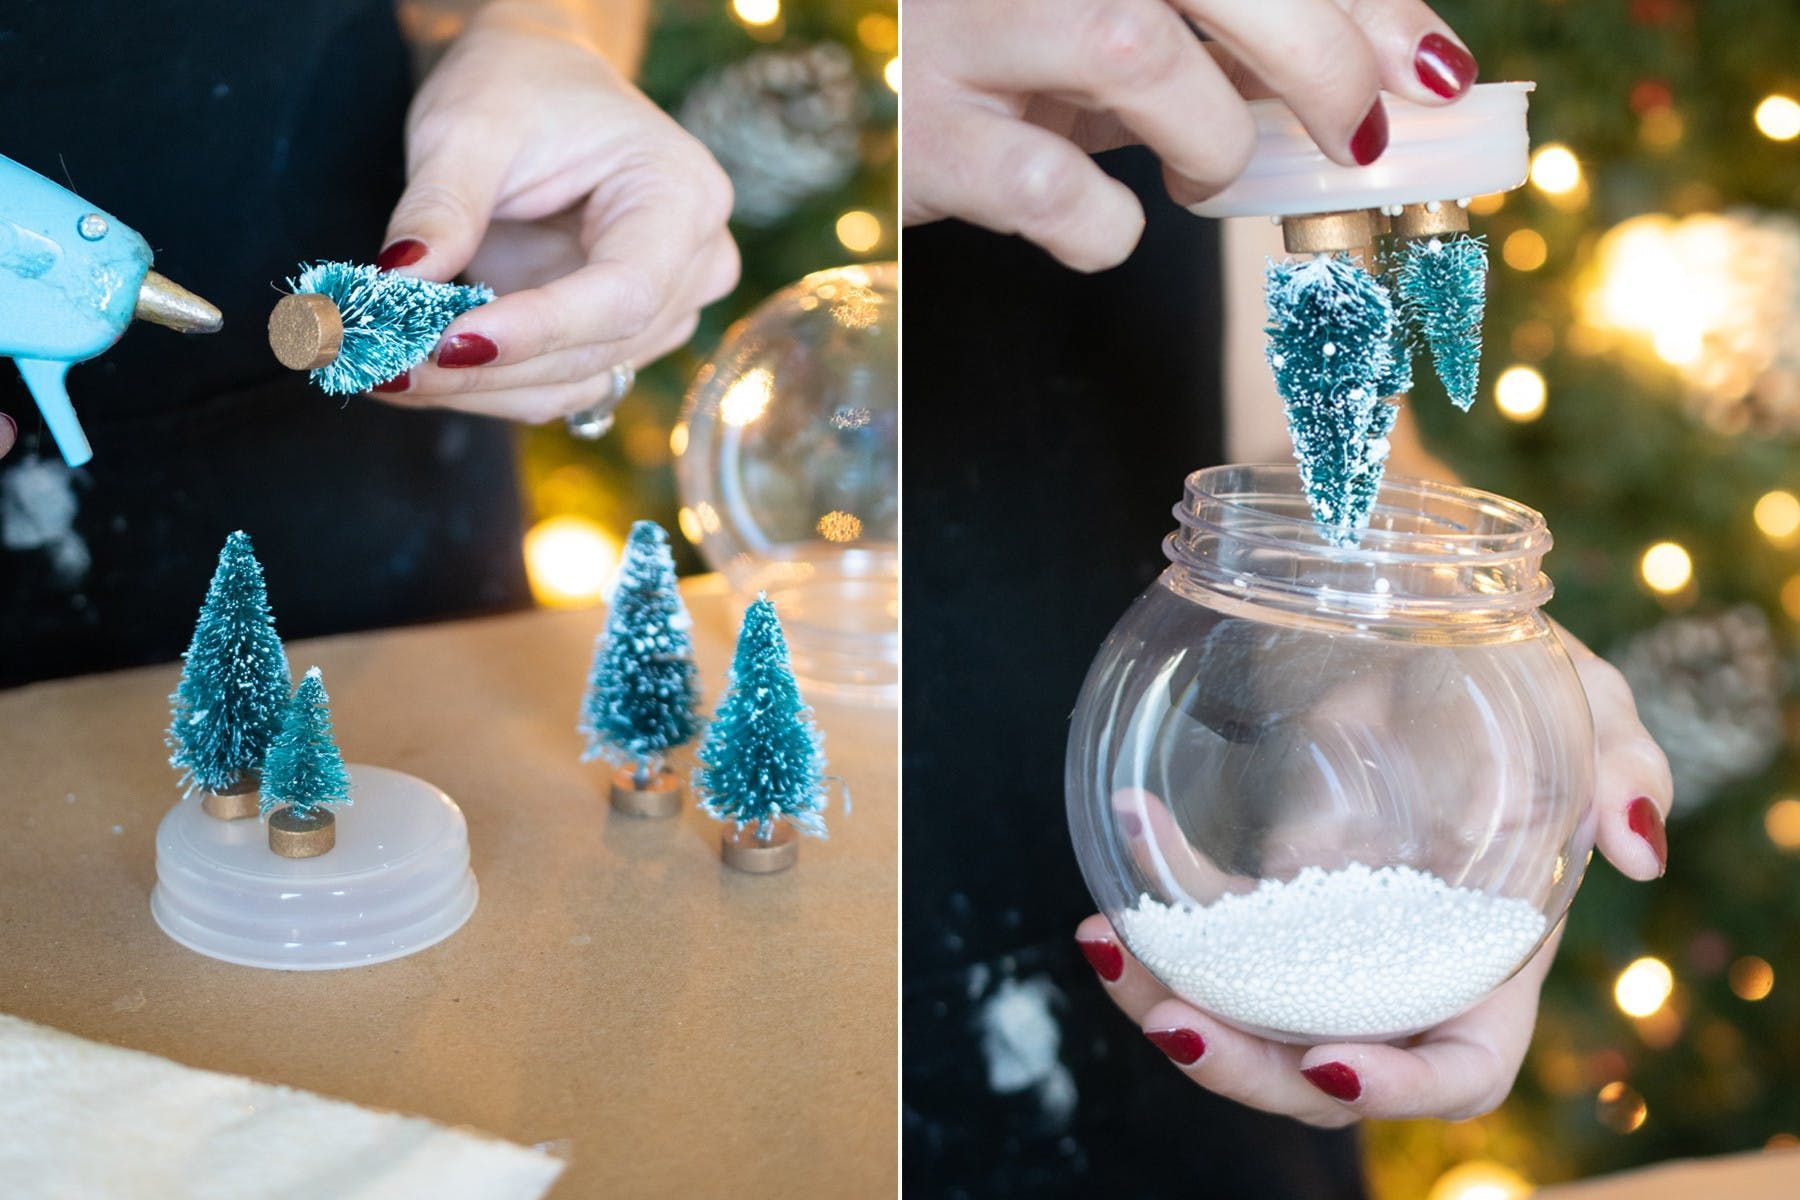 15 Dollar Store Christmas DIY Projects Anyone Can Do -   23 diy christmas decorations dollar store ideas